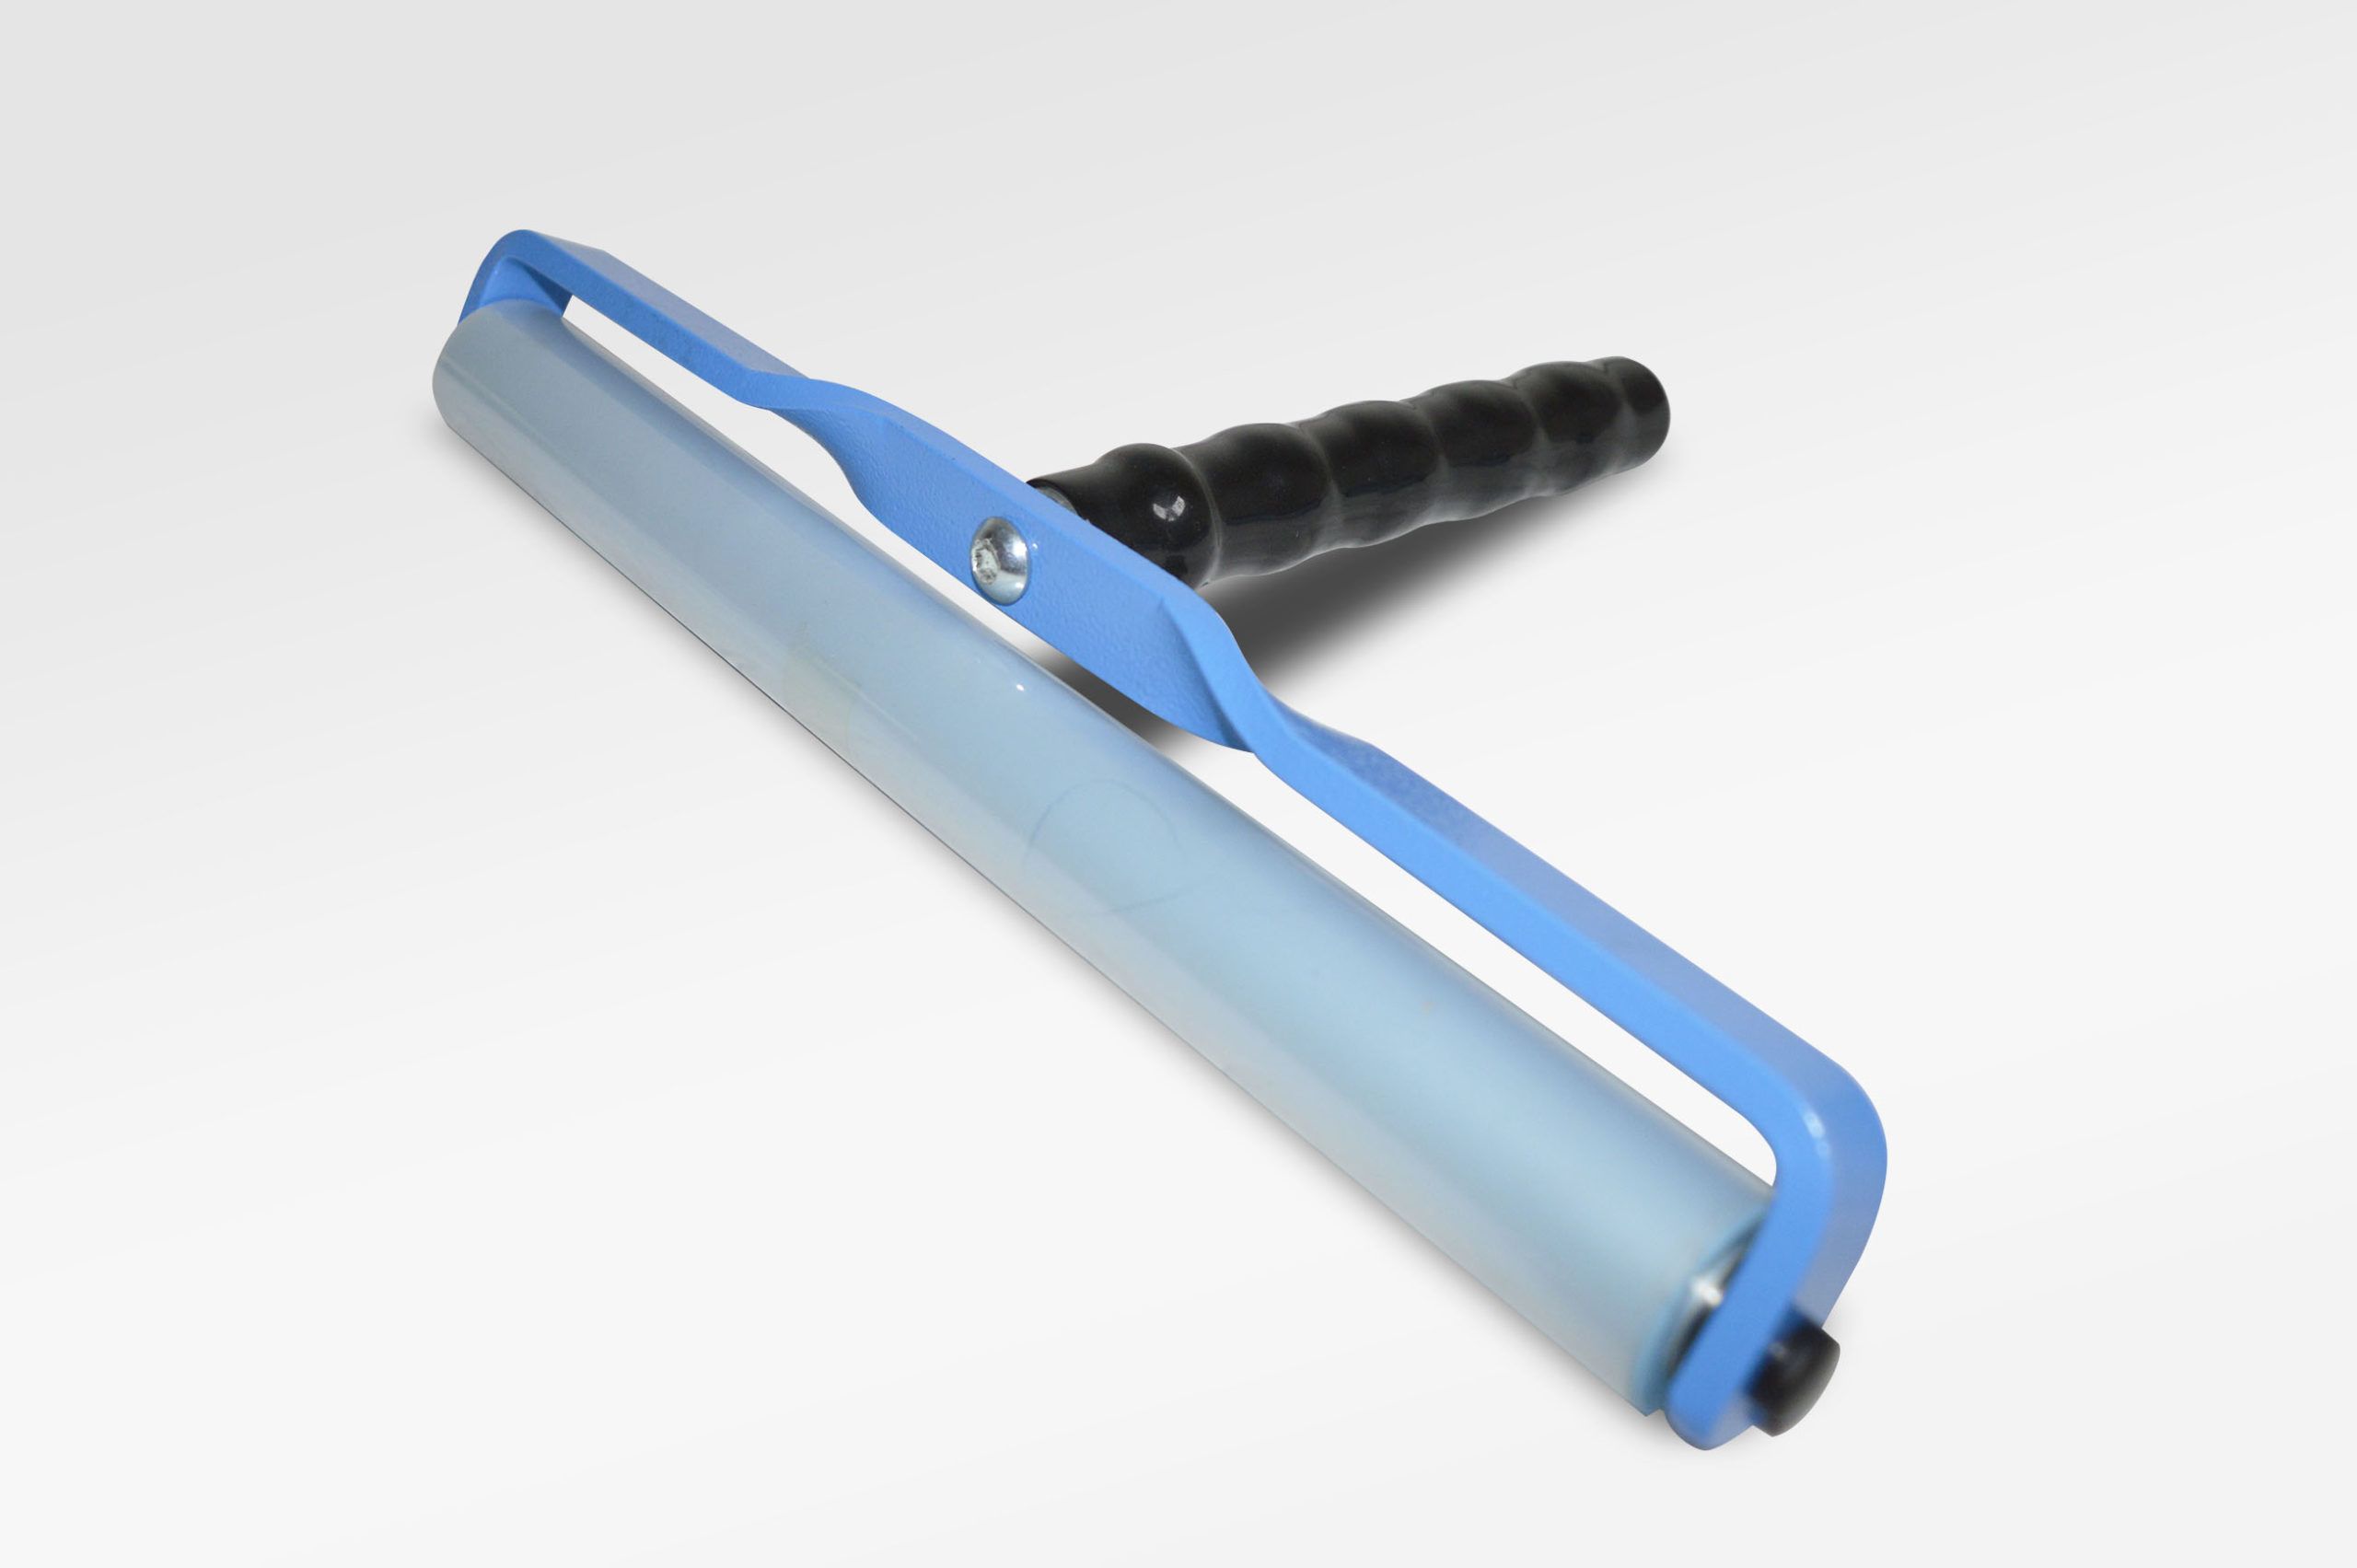 Fortex Blue Polymer DCR/DRS Tacky Cleaning Roller